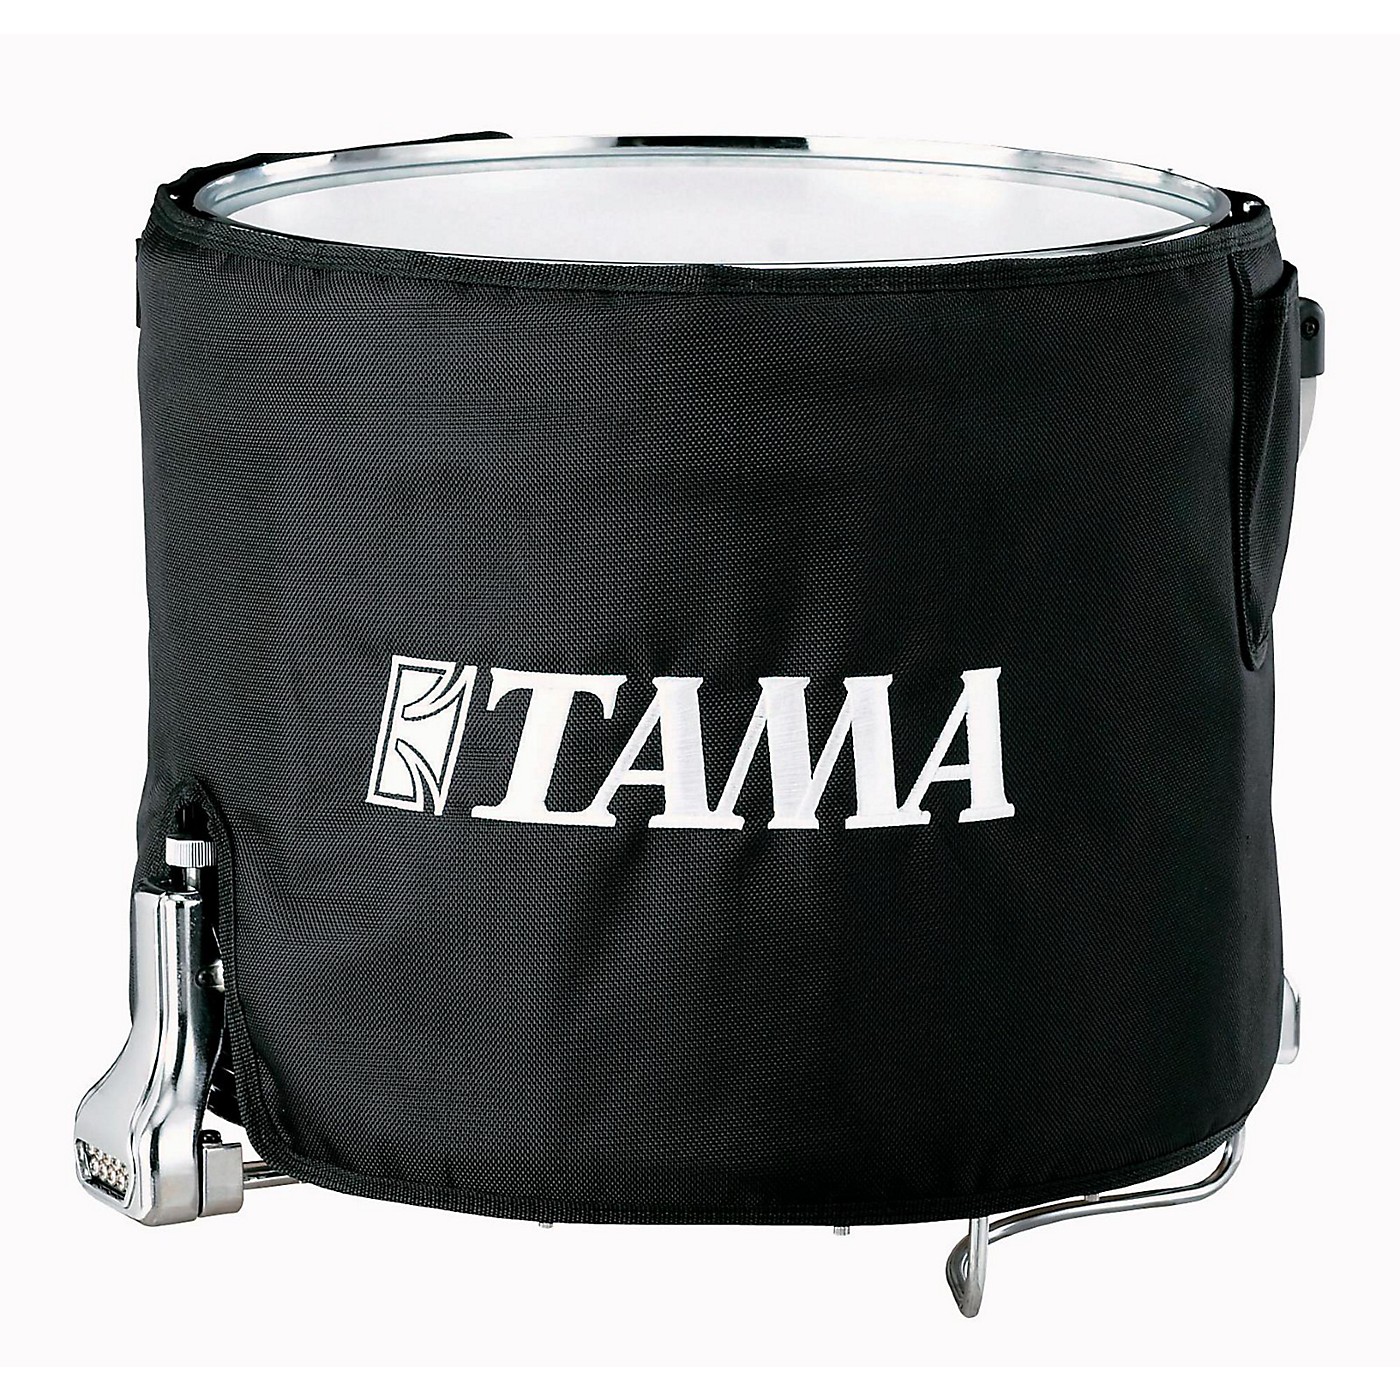 Tama Marching Snare Drum Cover thumbnail